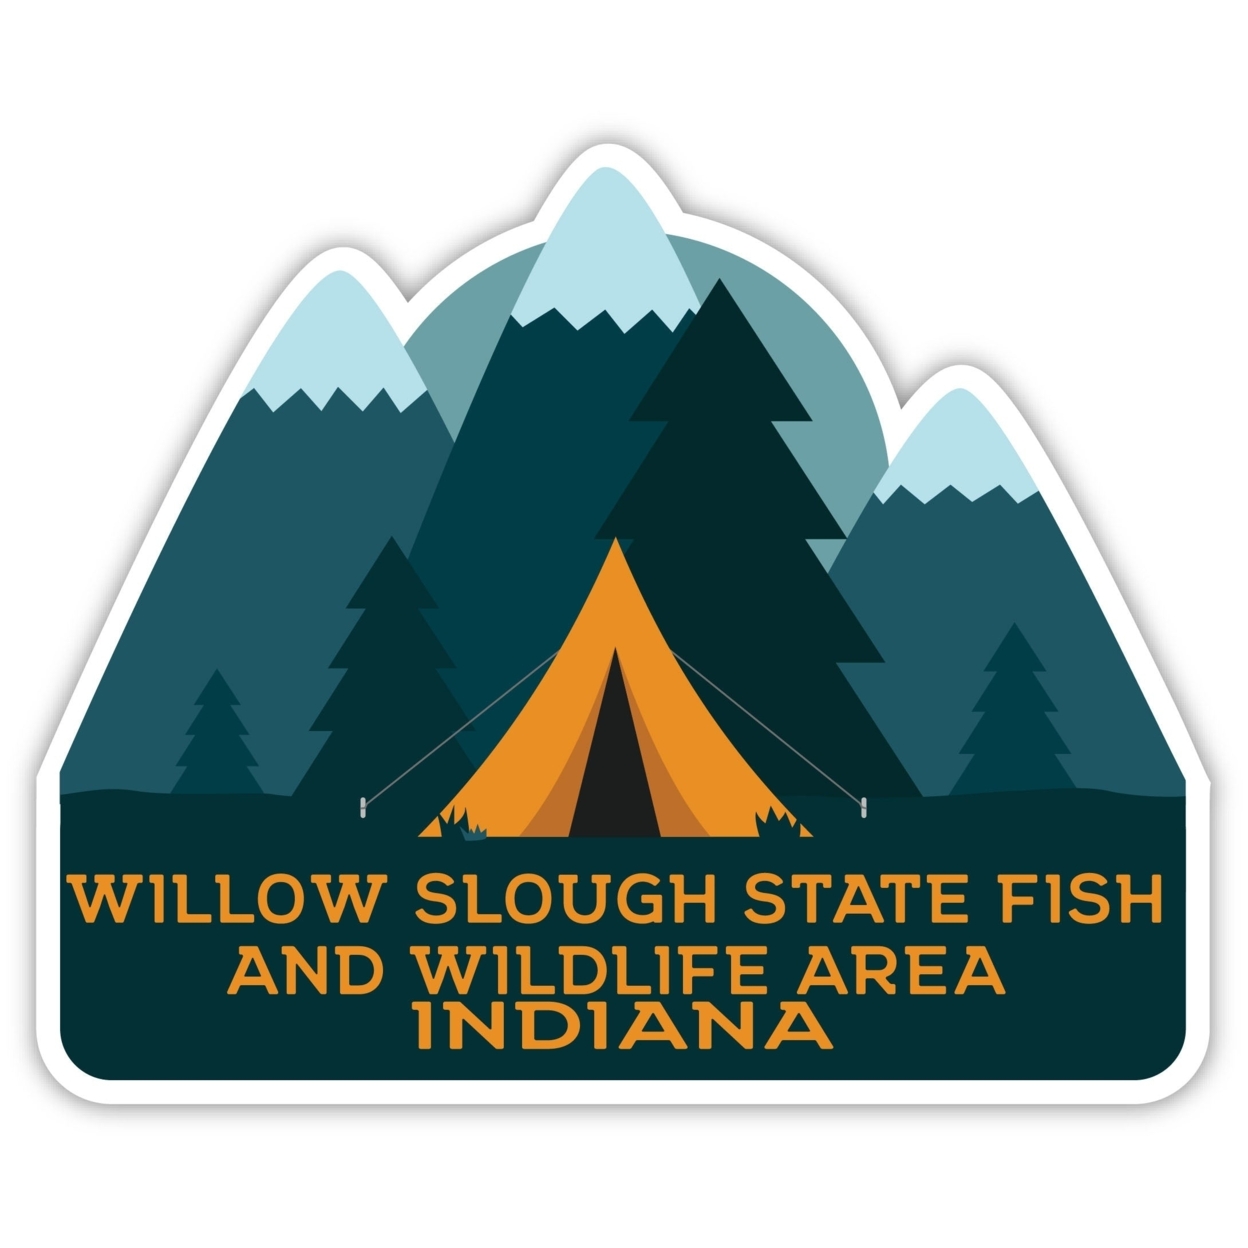 Willow Slough State Fish And Wildlife Area Indiana Souvenir Decorative Stickers (Choose Theme And Size) - Single Unit, 2-Inch, Tent